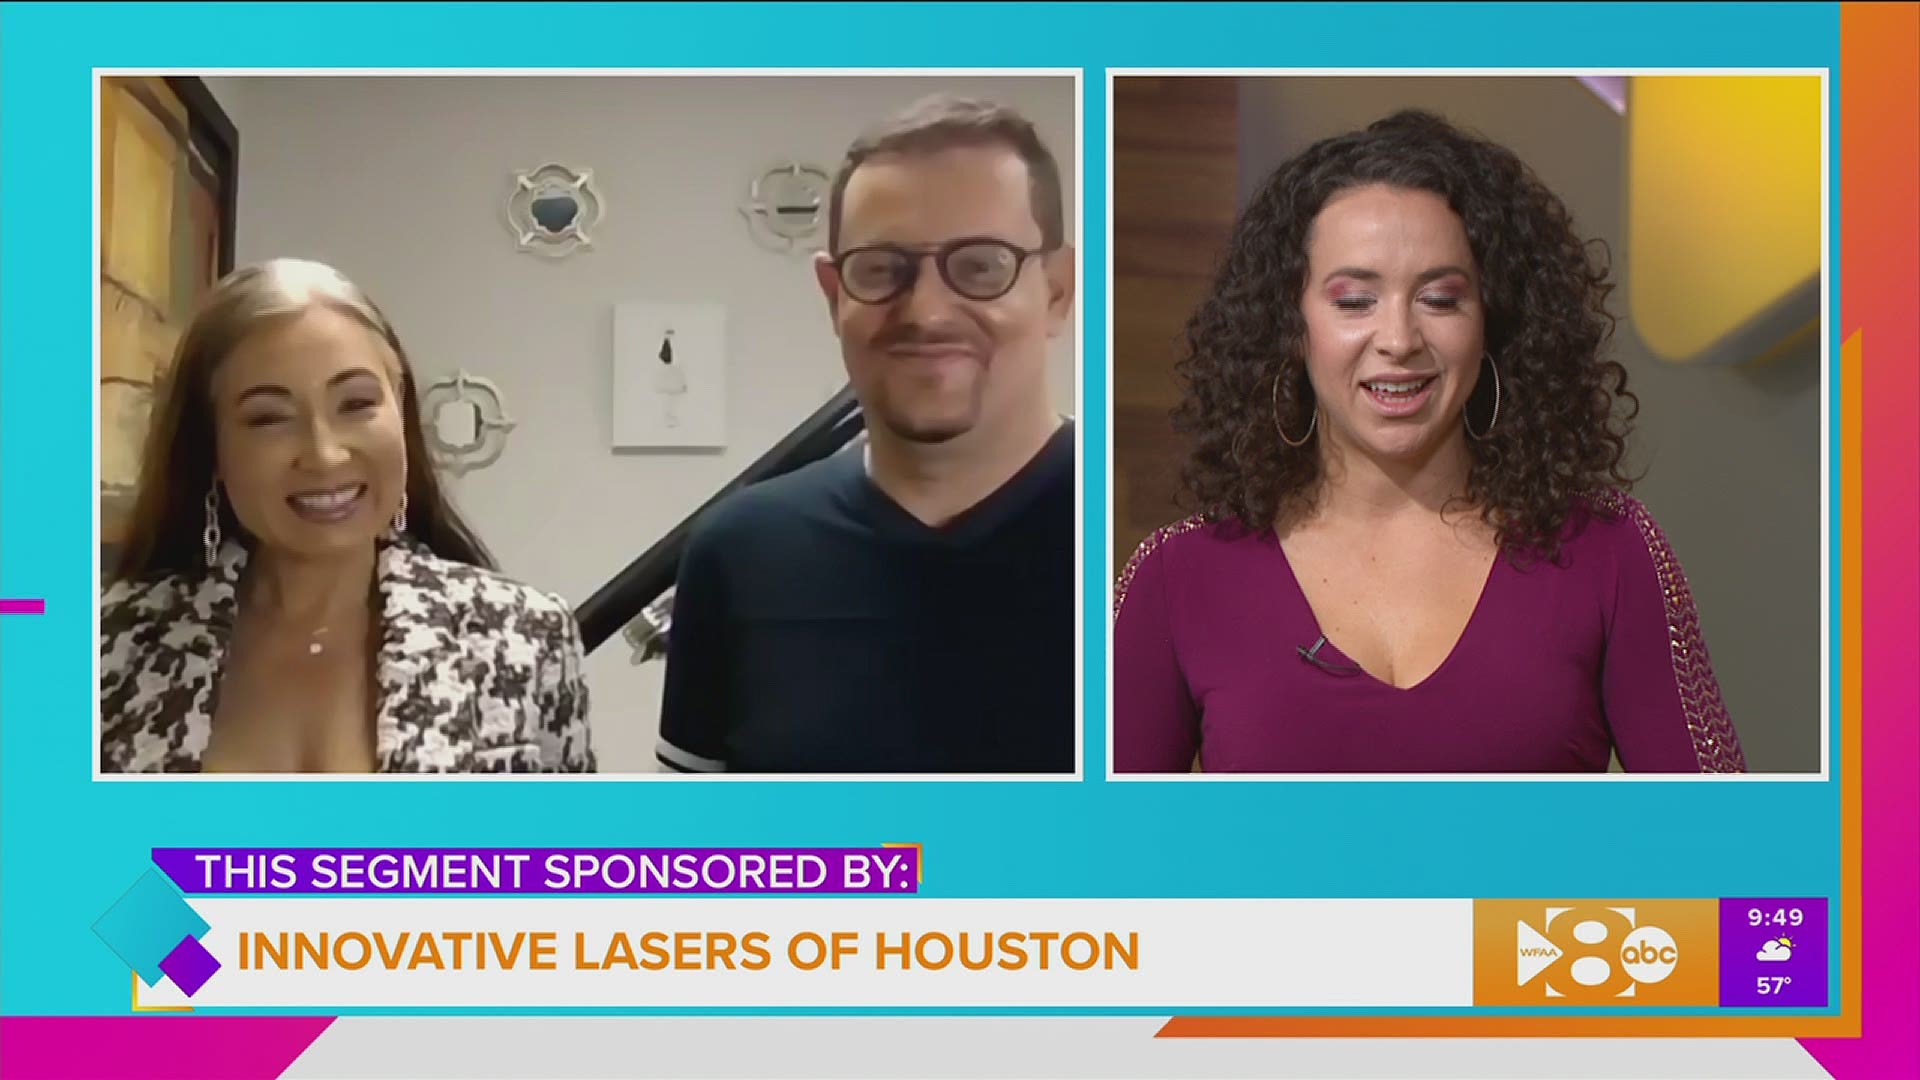 This segment is sponsored by: Innovative Lasers of Houston